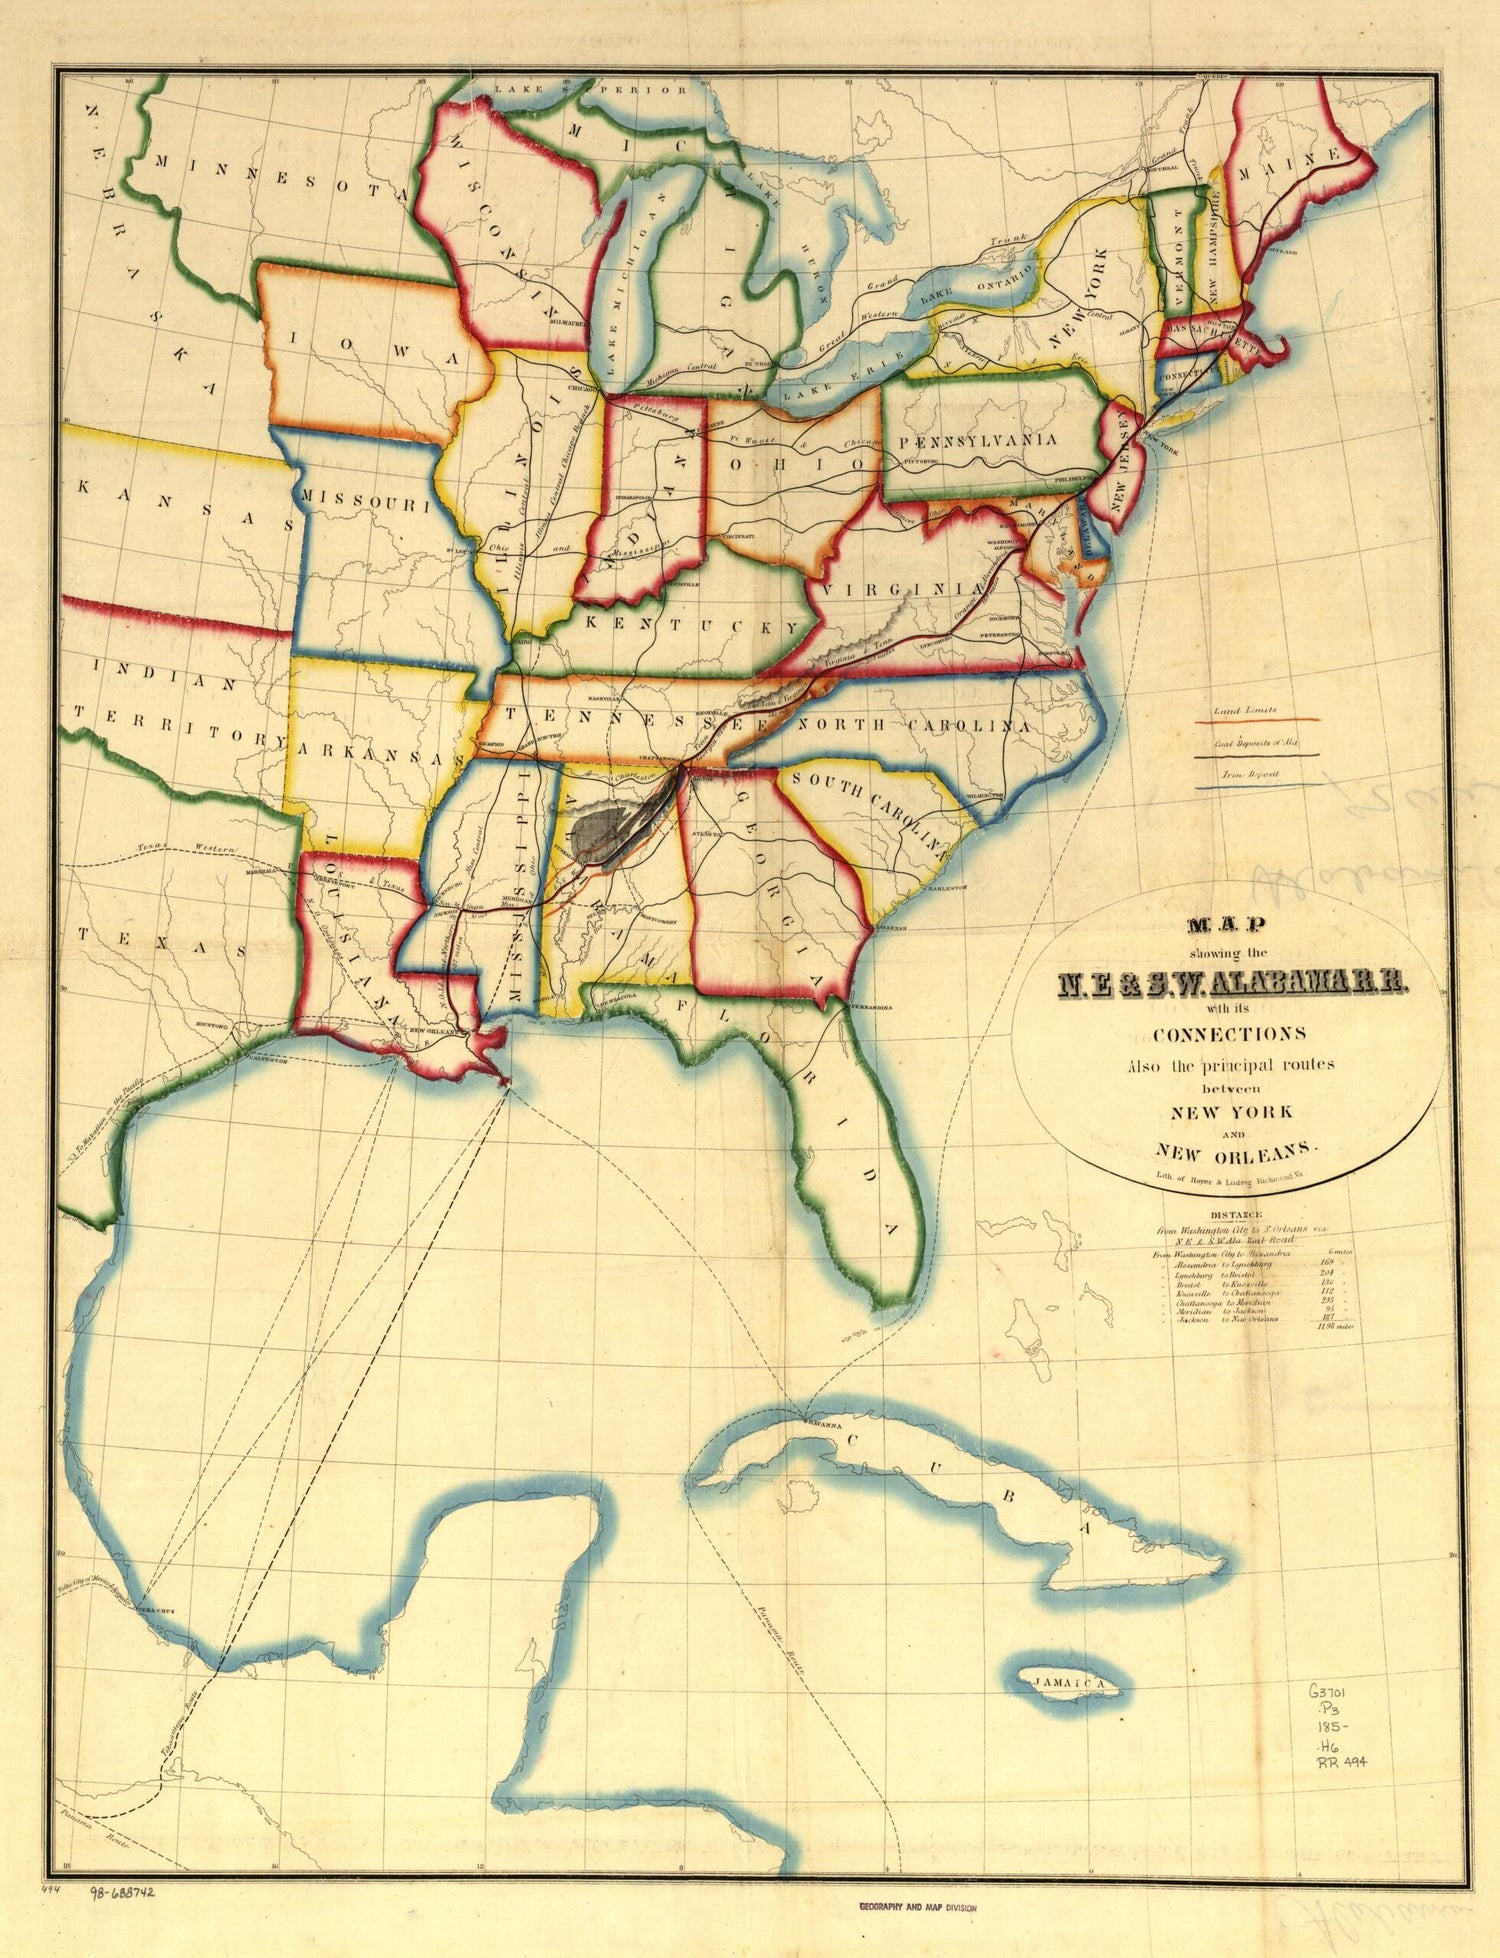 This old map of Map Showing the N.E. &amp; S.W. Alabama R.R. With Its Connections Also the Principal Routes Between New York and New Orleans from 1850 was created by  Hoyer &amp; Ludwig,  North East and South West Alabama Railroad in 1850